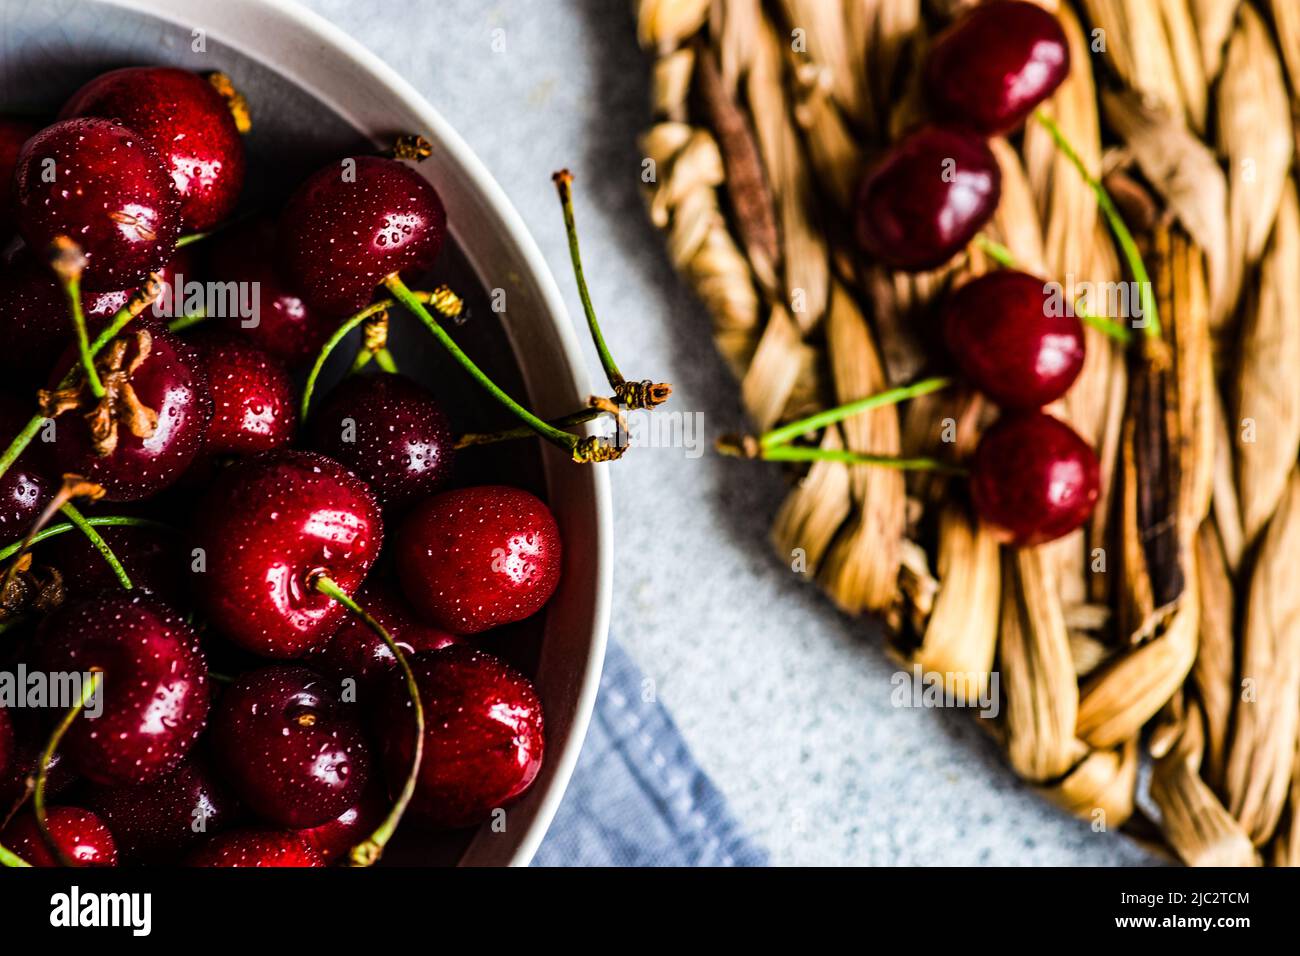 Overhead view of a bowl of organic cherries Stock Photo